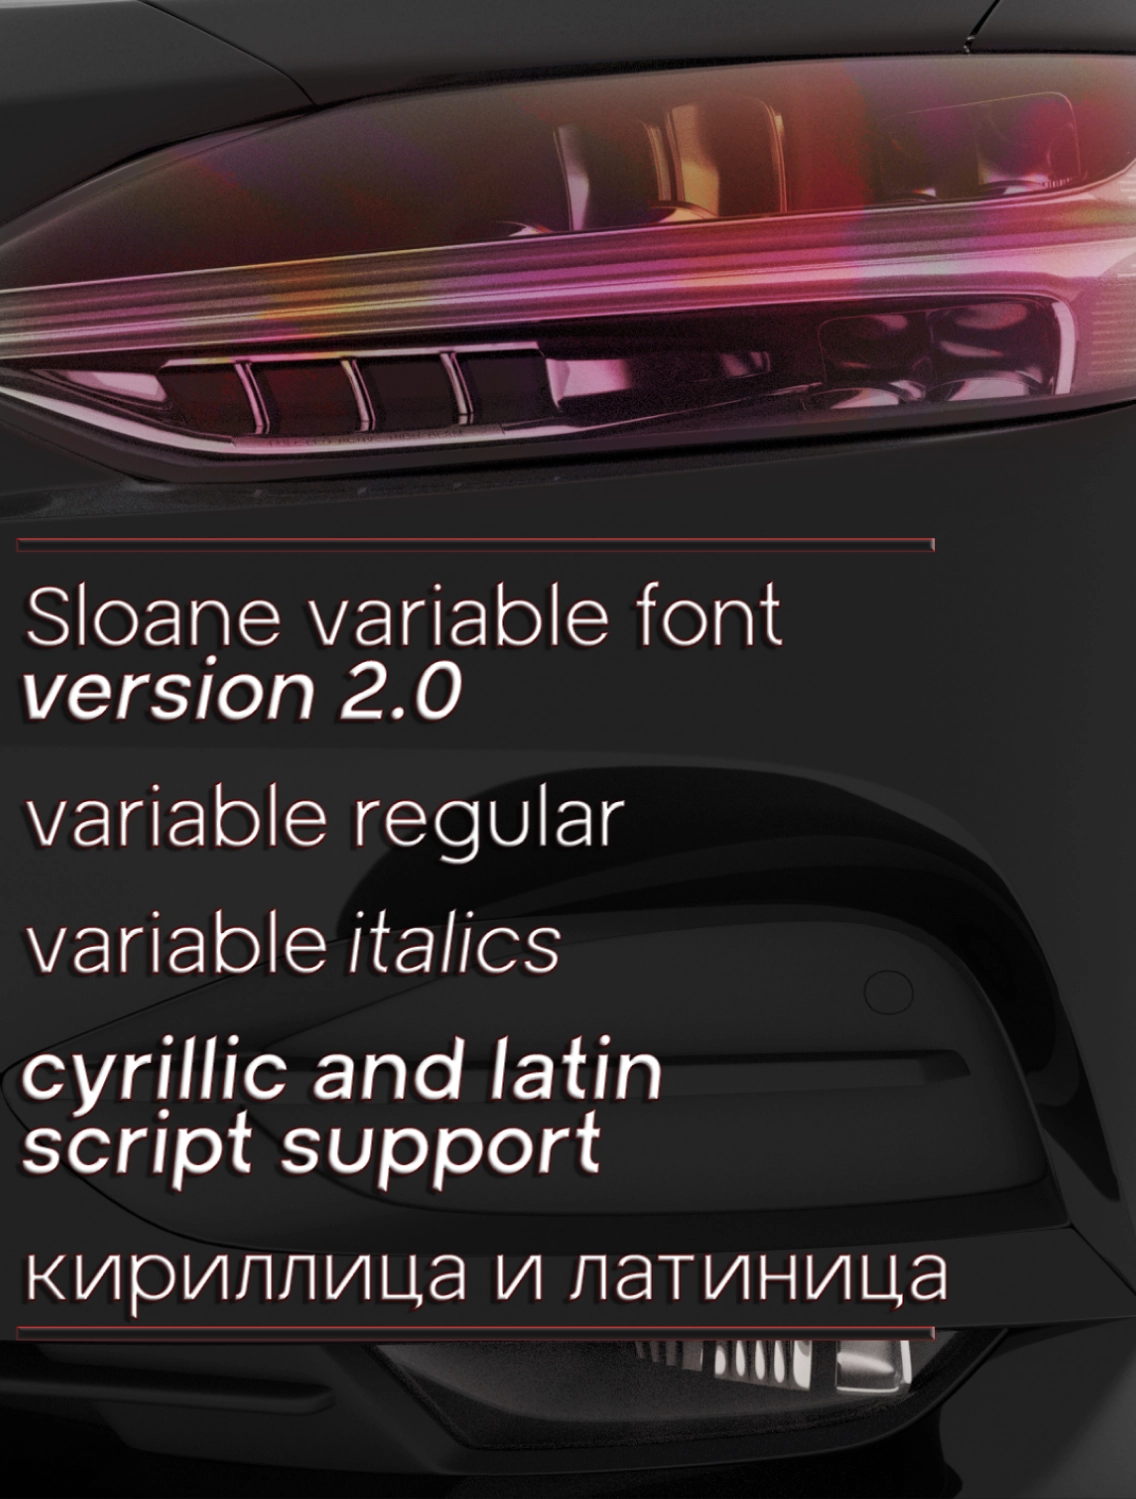 Font showcase with a car render behind